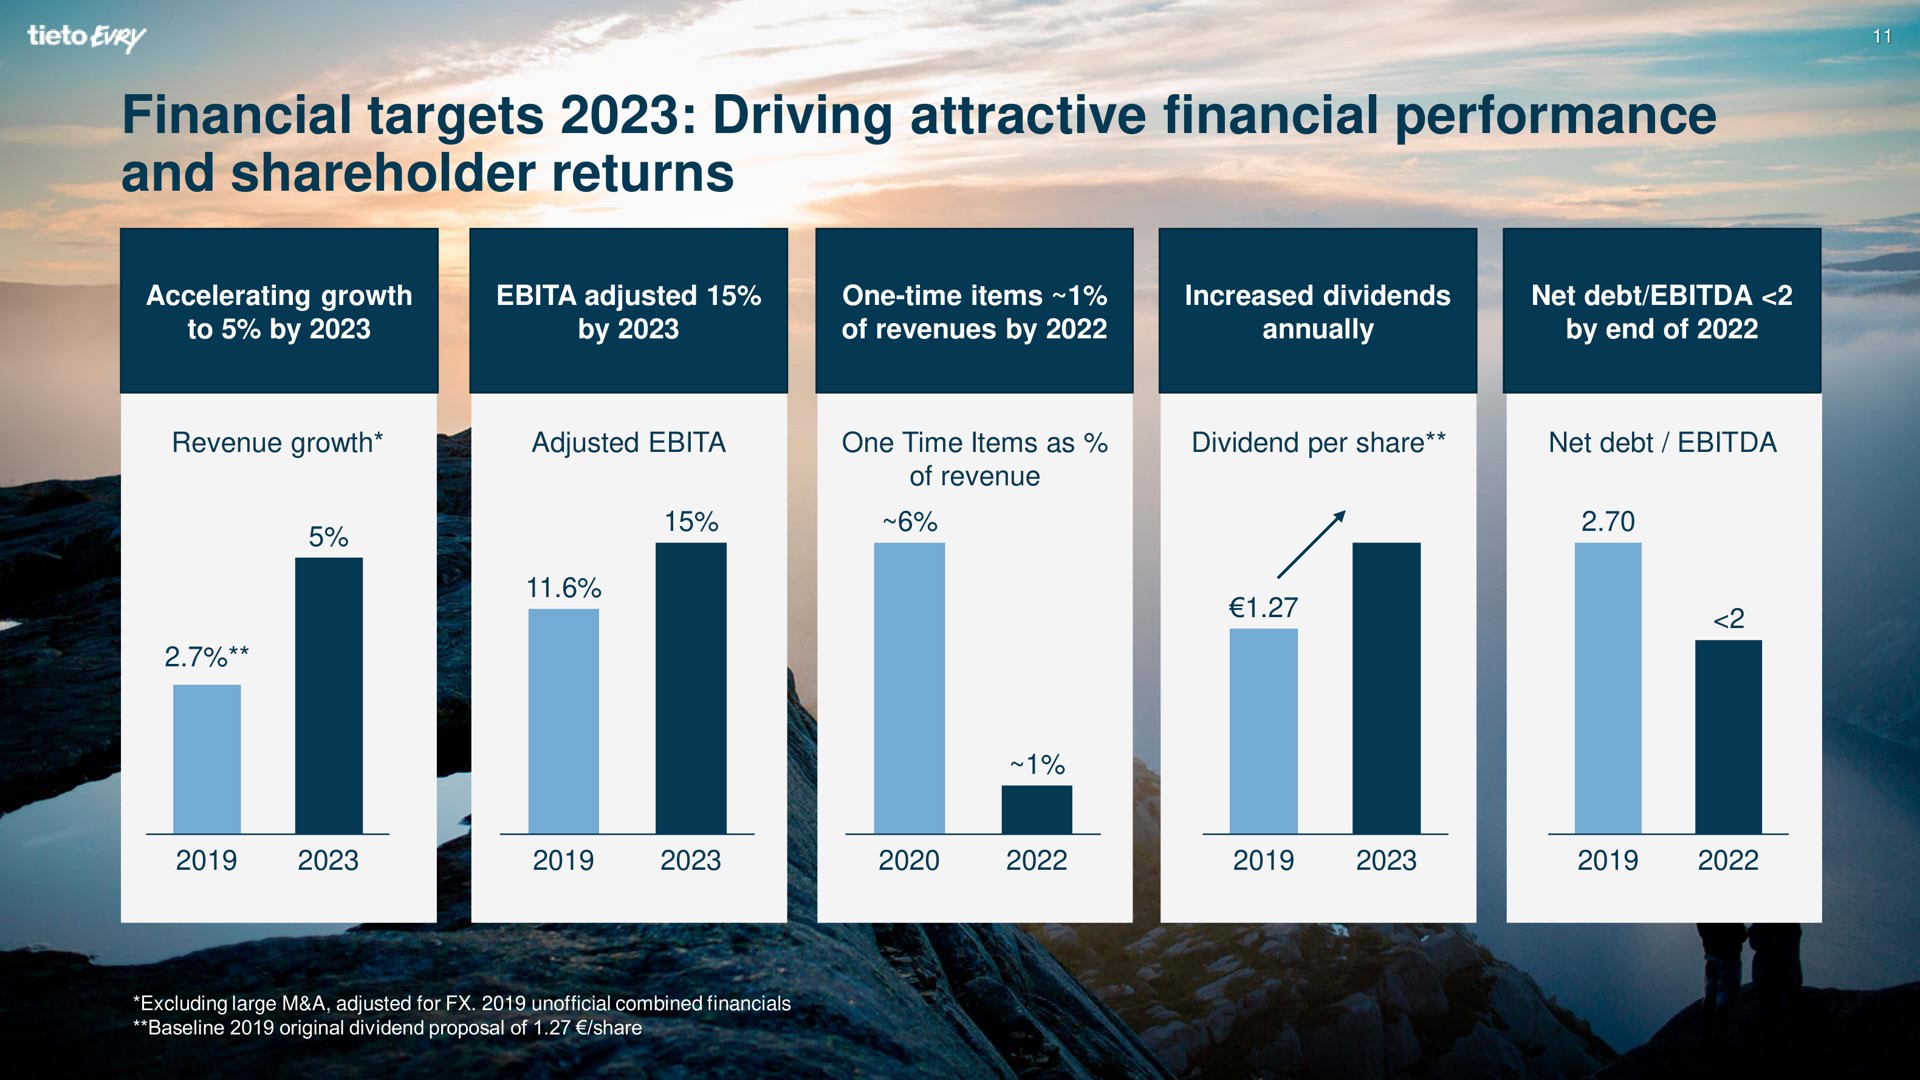 financial targets driving attractive financial performance and shareholder returns | Tietoevry